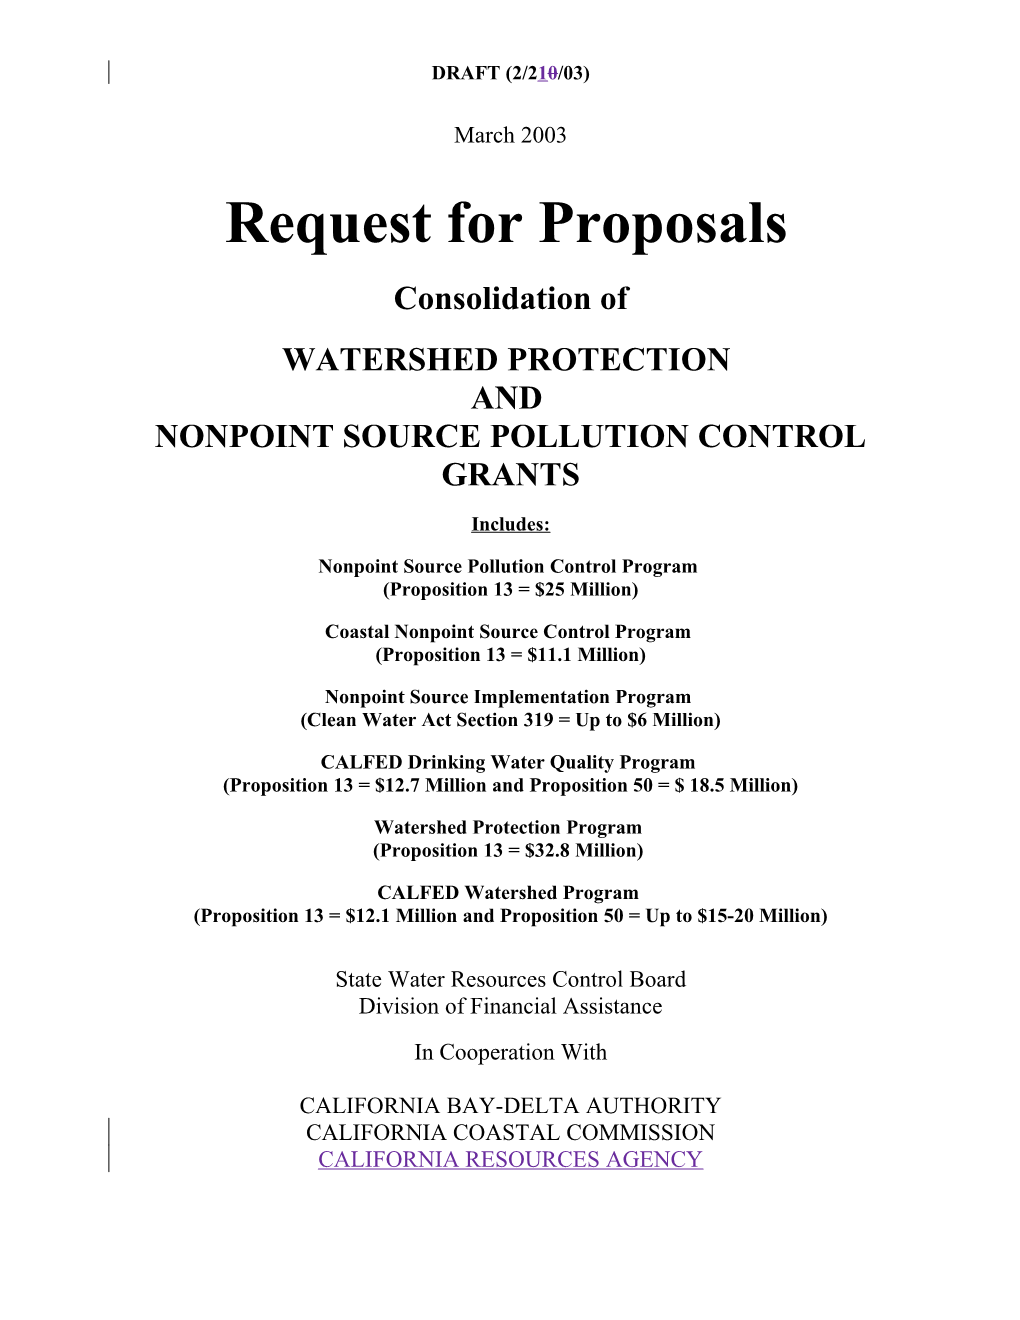 Nonpoint Source Pollution Control Grants